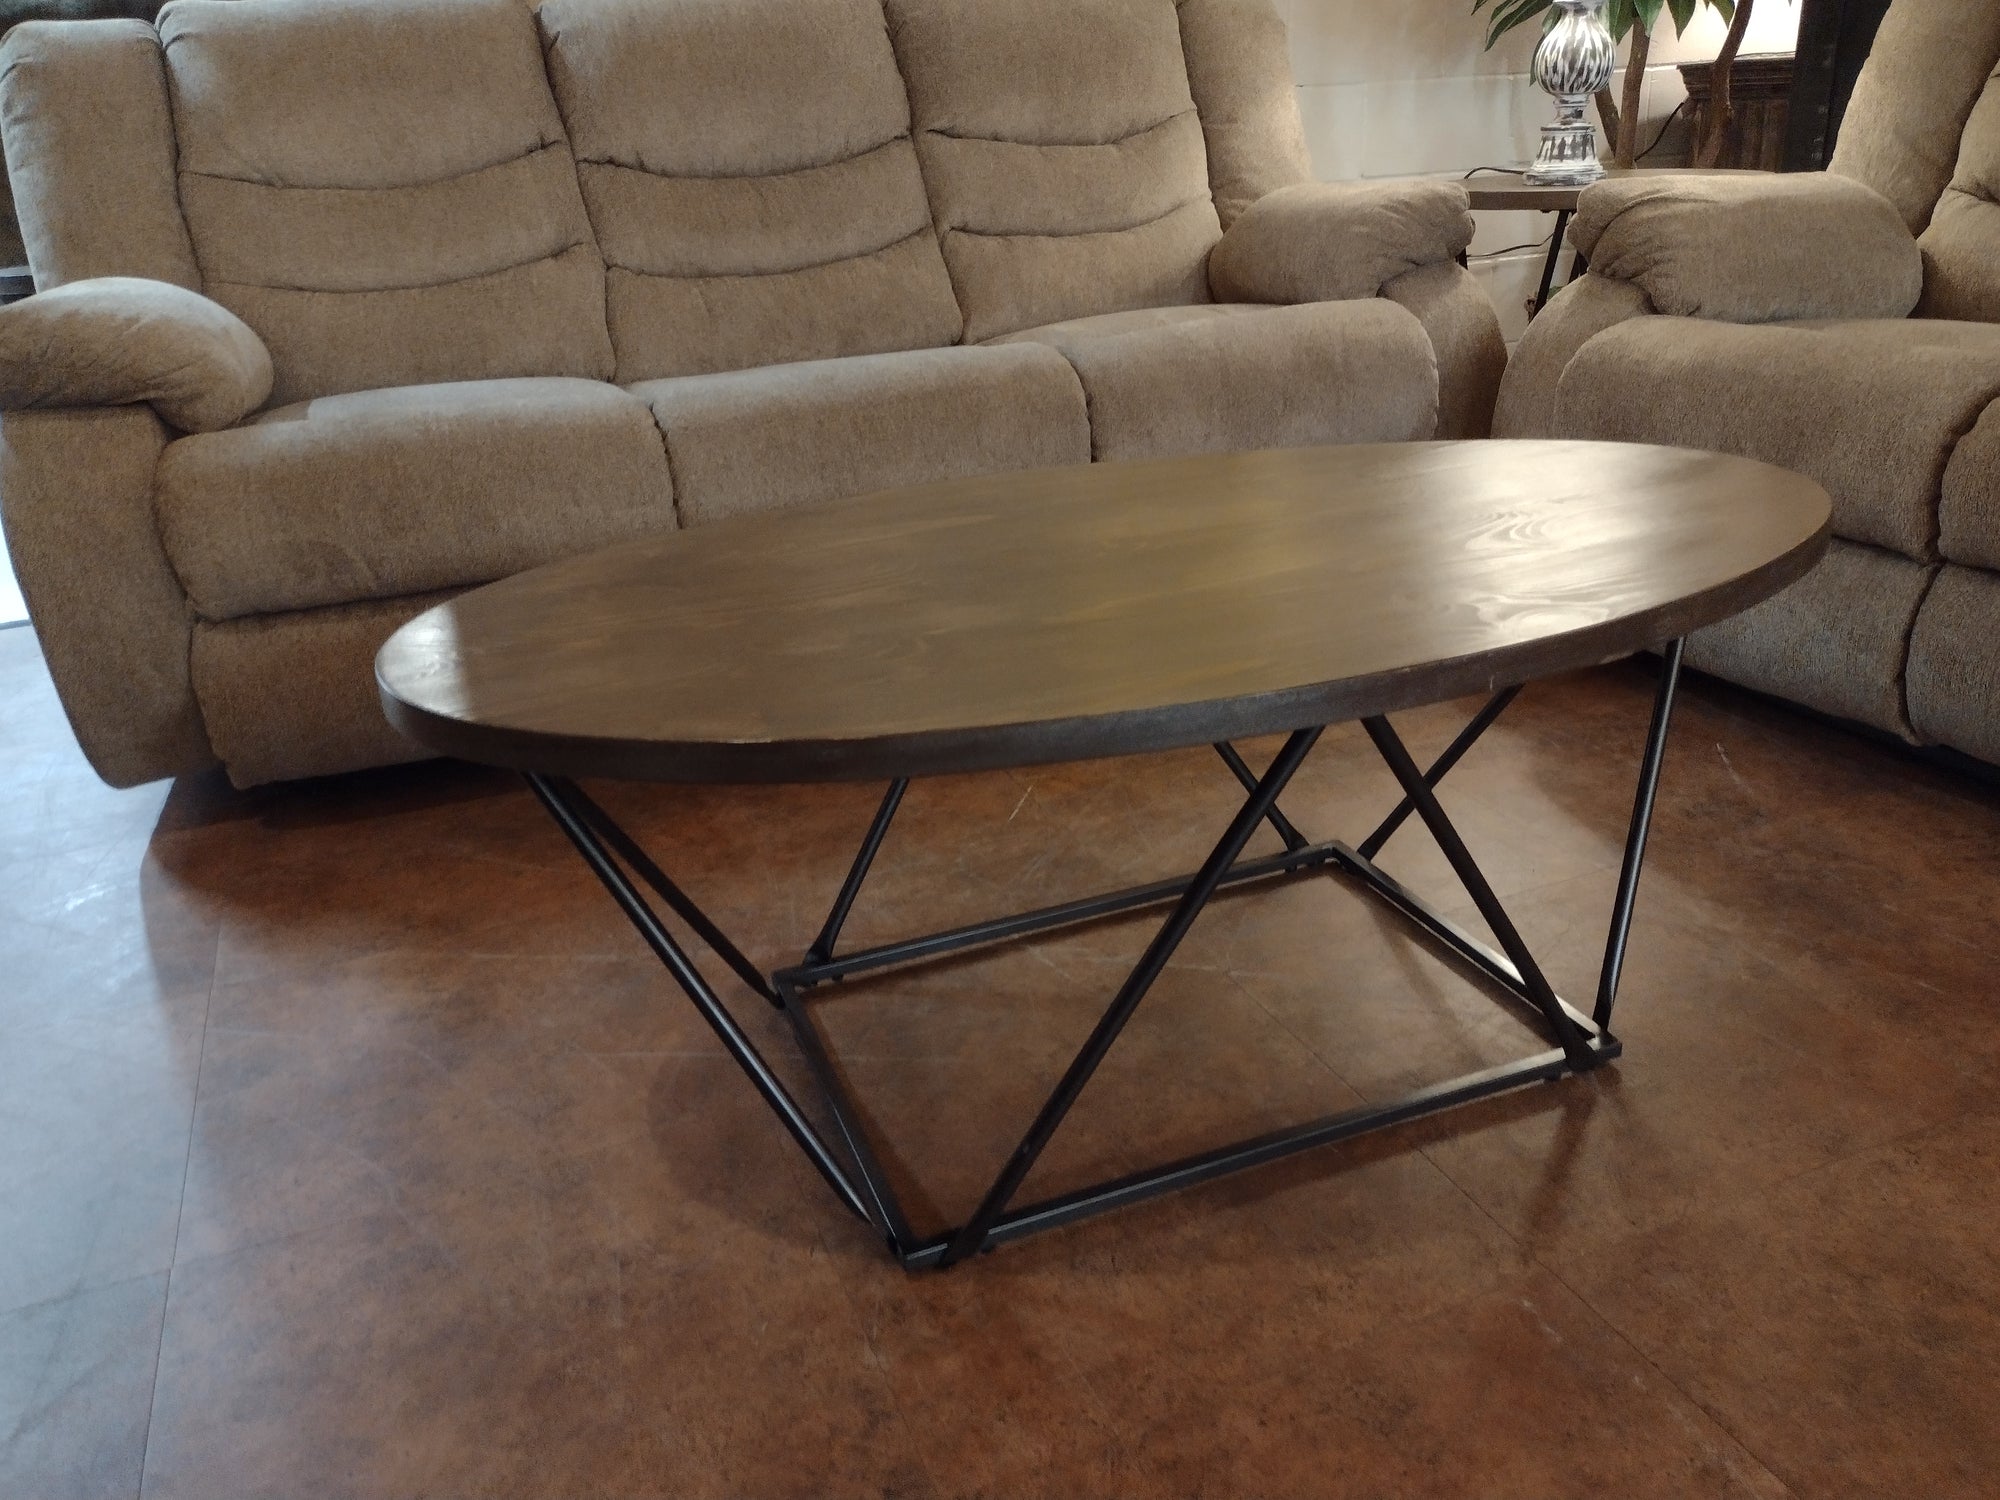 T495 FI-A Coffee Table and Two End Tables